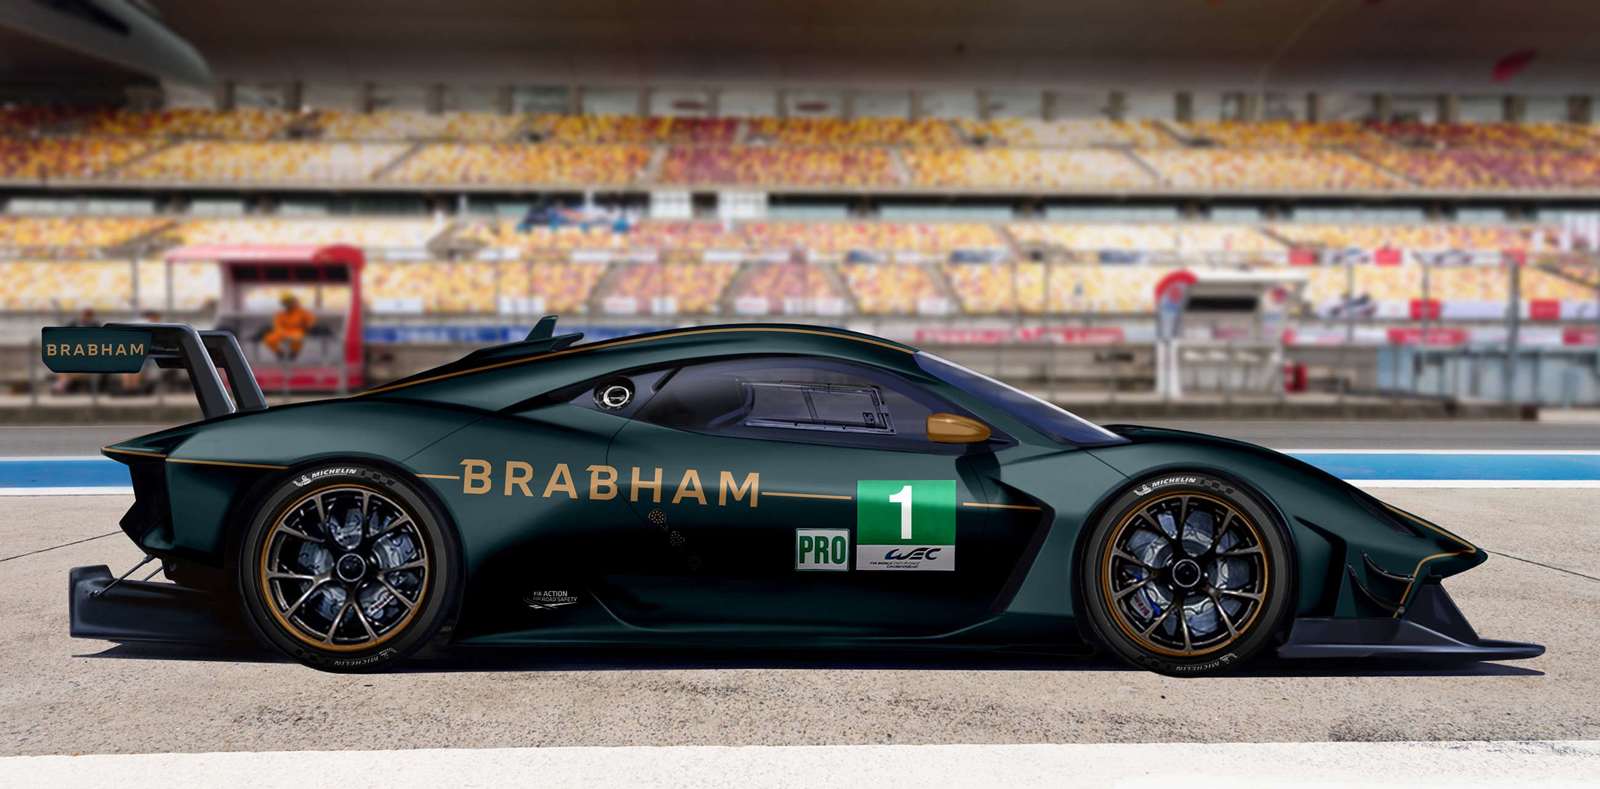 The Brabham BT62 will race at Le Mans